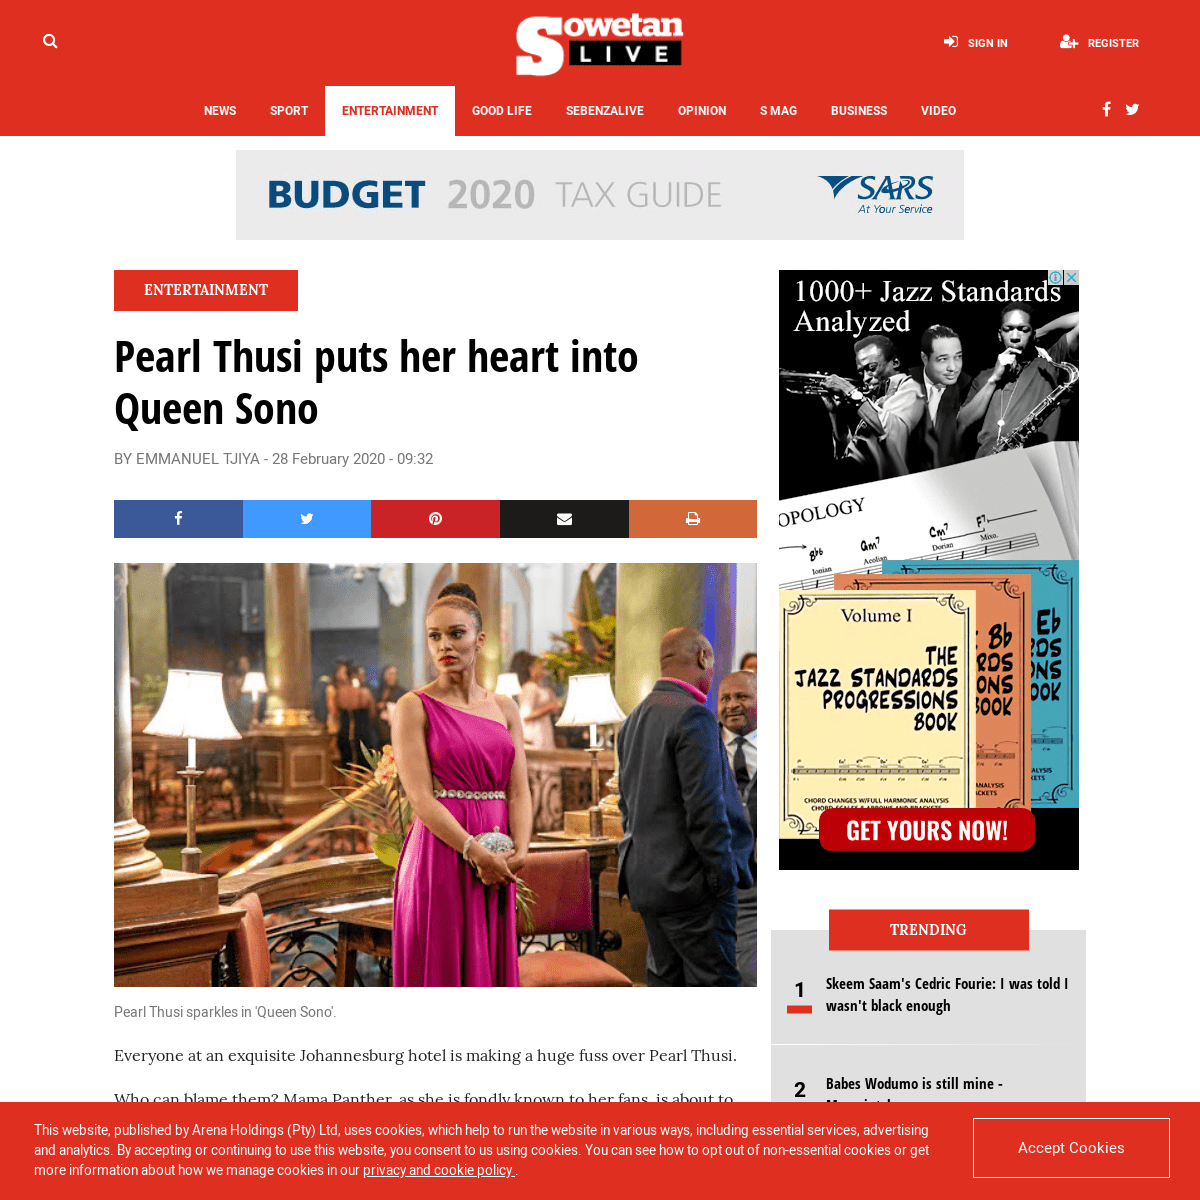 A complete backup of www.sowetanlive.co.za/entertainment/2020-02-28-pearl-thusi-puts-her-heart-into-queen-sono/